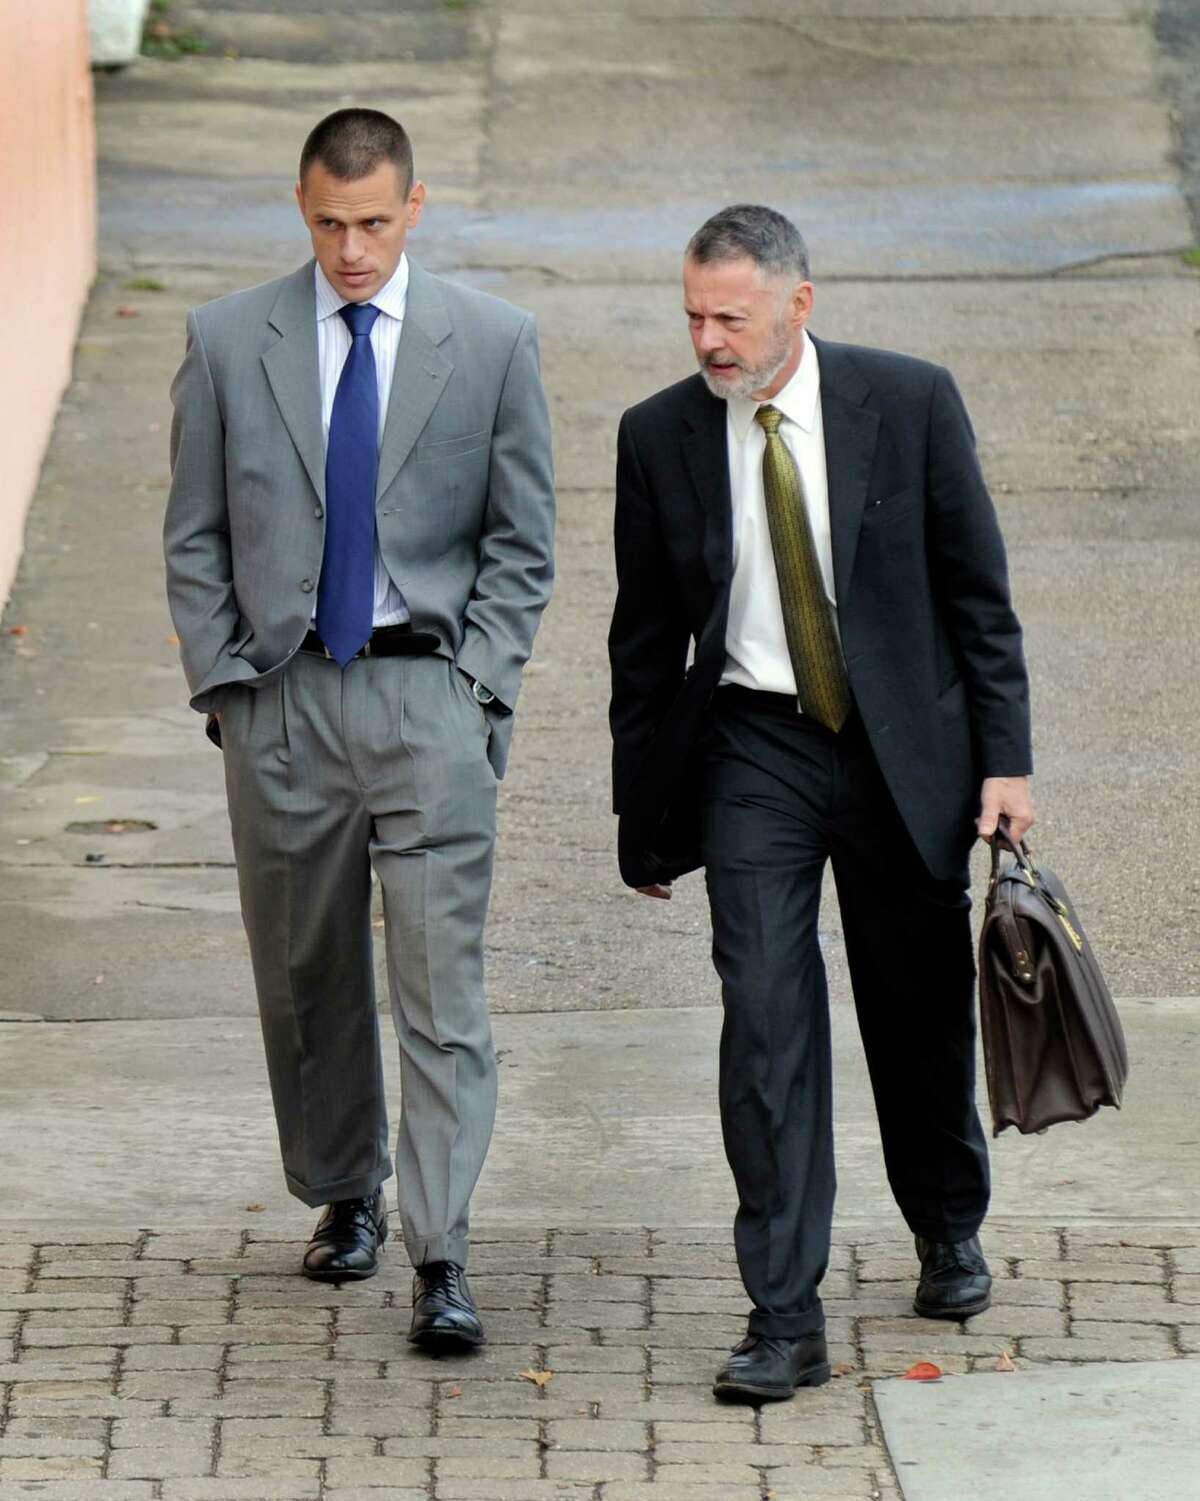 Kyle Seitz, left, arrives at the Danbury Superior Court Wednesday morning, Nov. 12, 2014, accompanied by his attorney. Seitz of Ridgefield, has been charged with negligent homicide in the death of his 15-month-old son Benjamin who died after being left in a hot car.